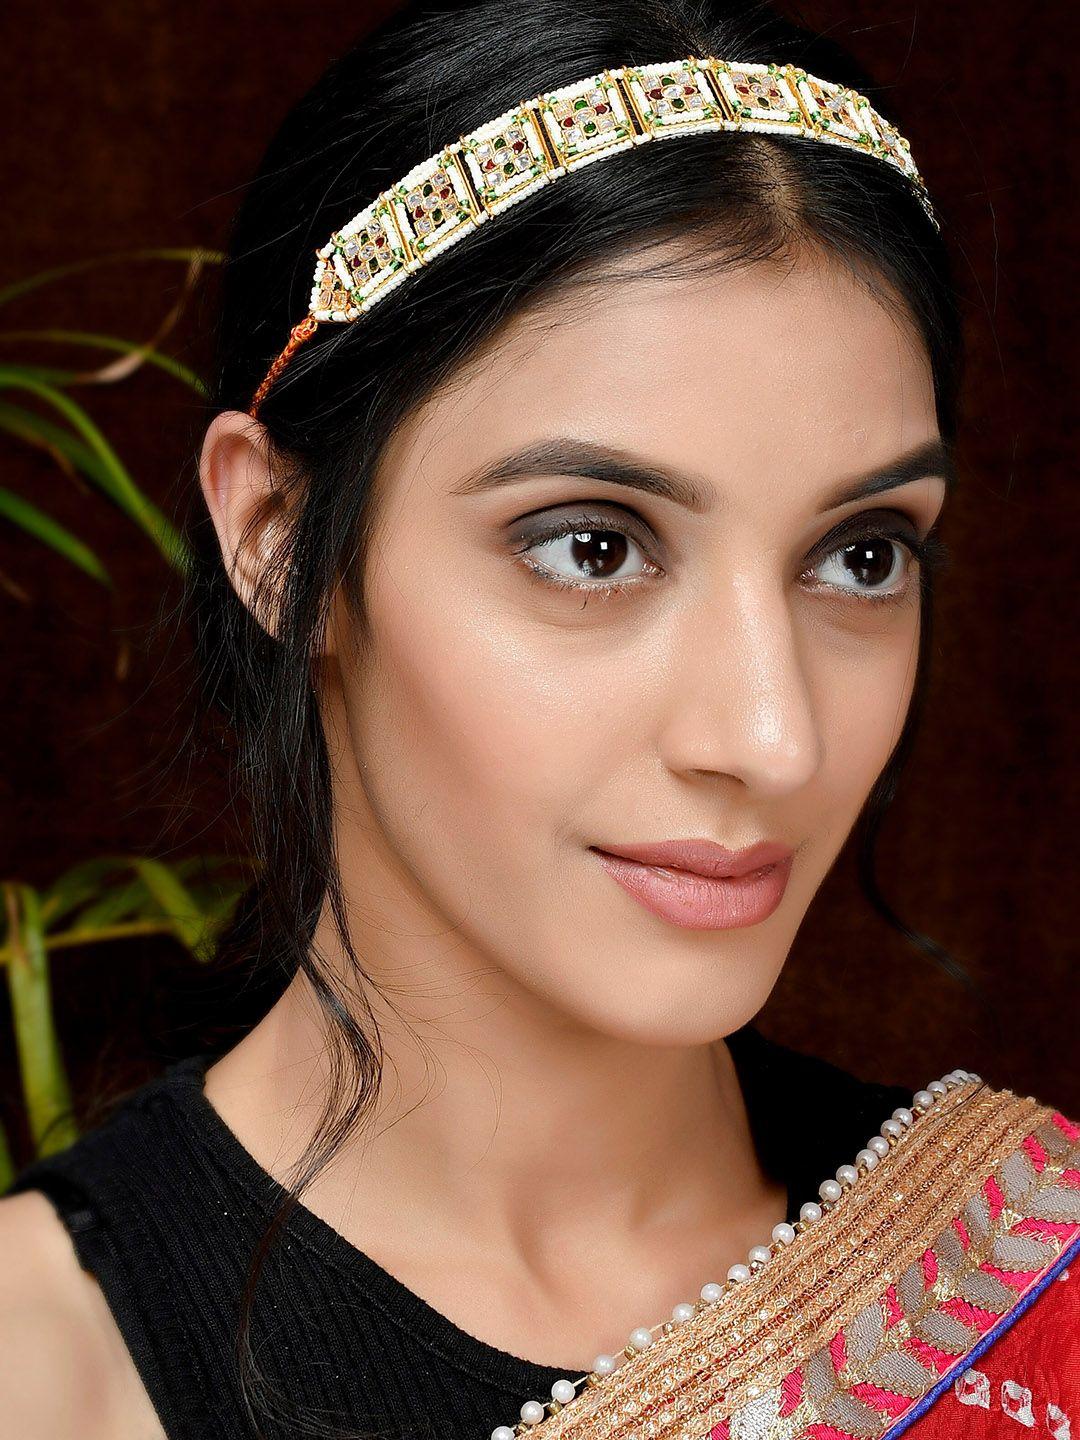 silvermerc designs gold-plated artificial stone studded headchain